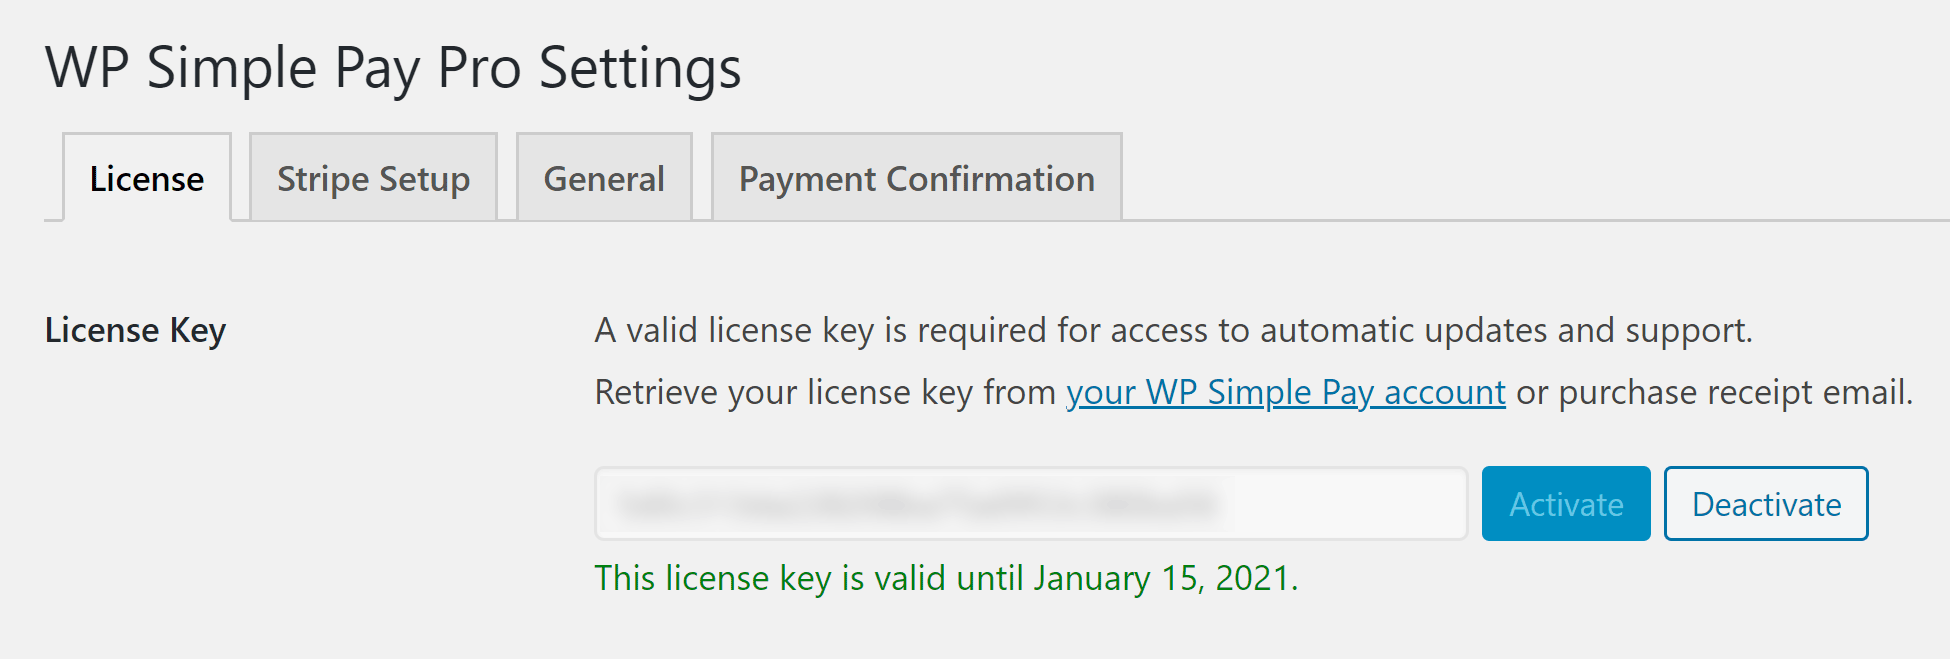 WP Simple Pay License Settings